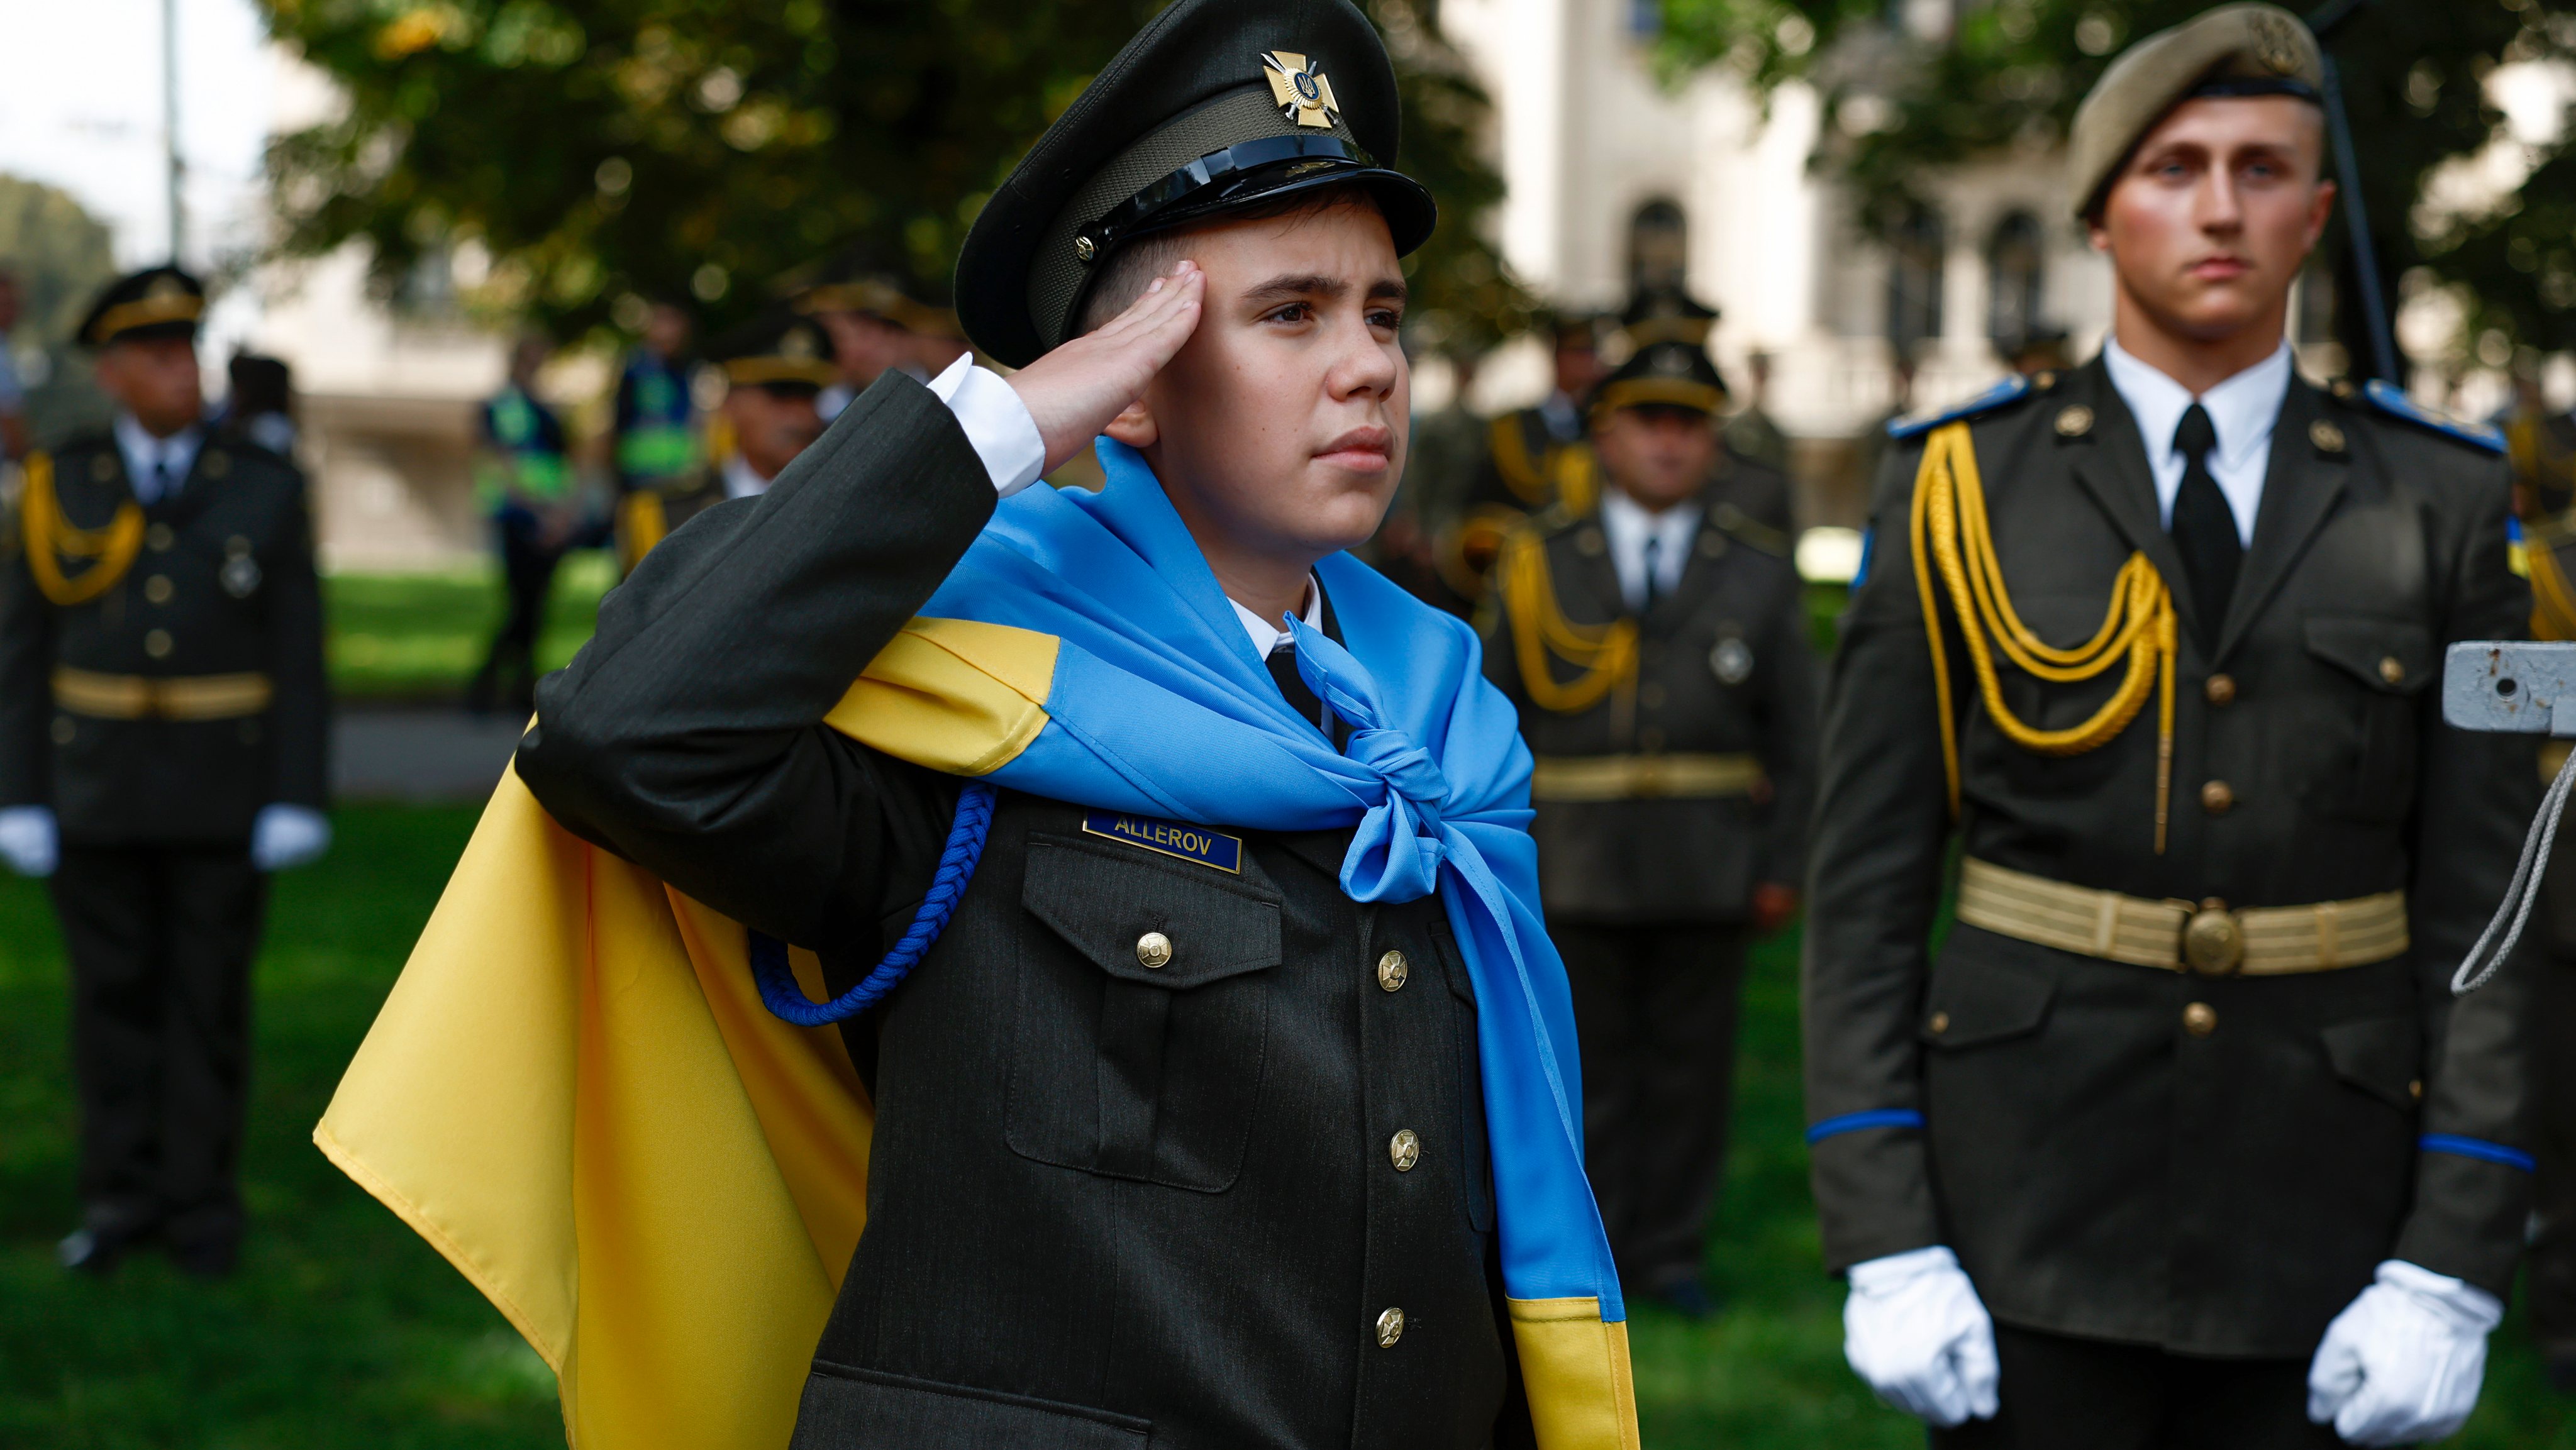 Ukraine Celebrates Independence Day Amid Current Fight Against Russia